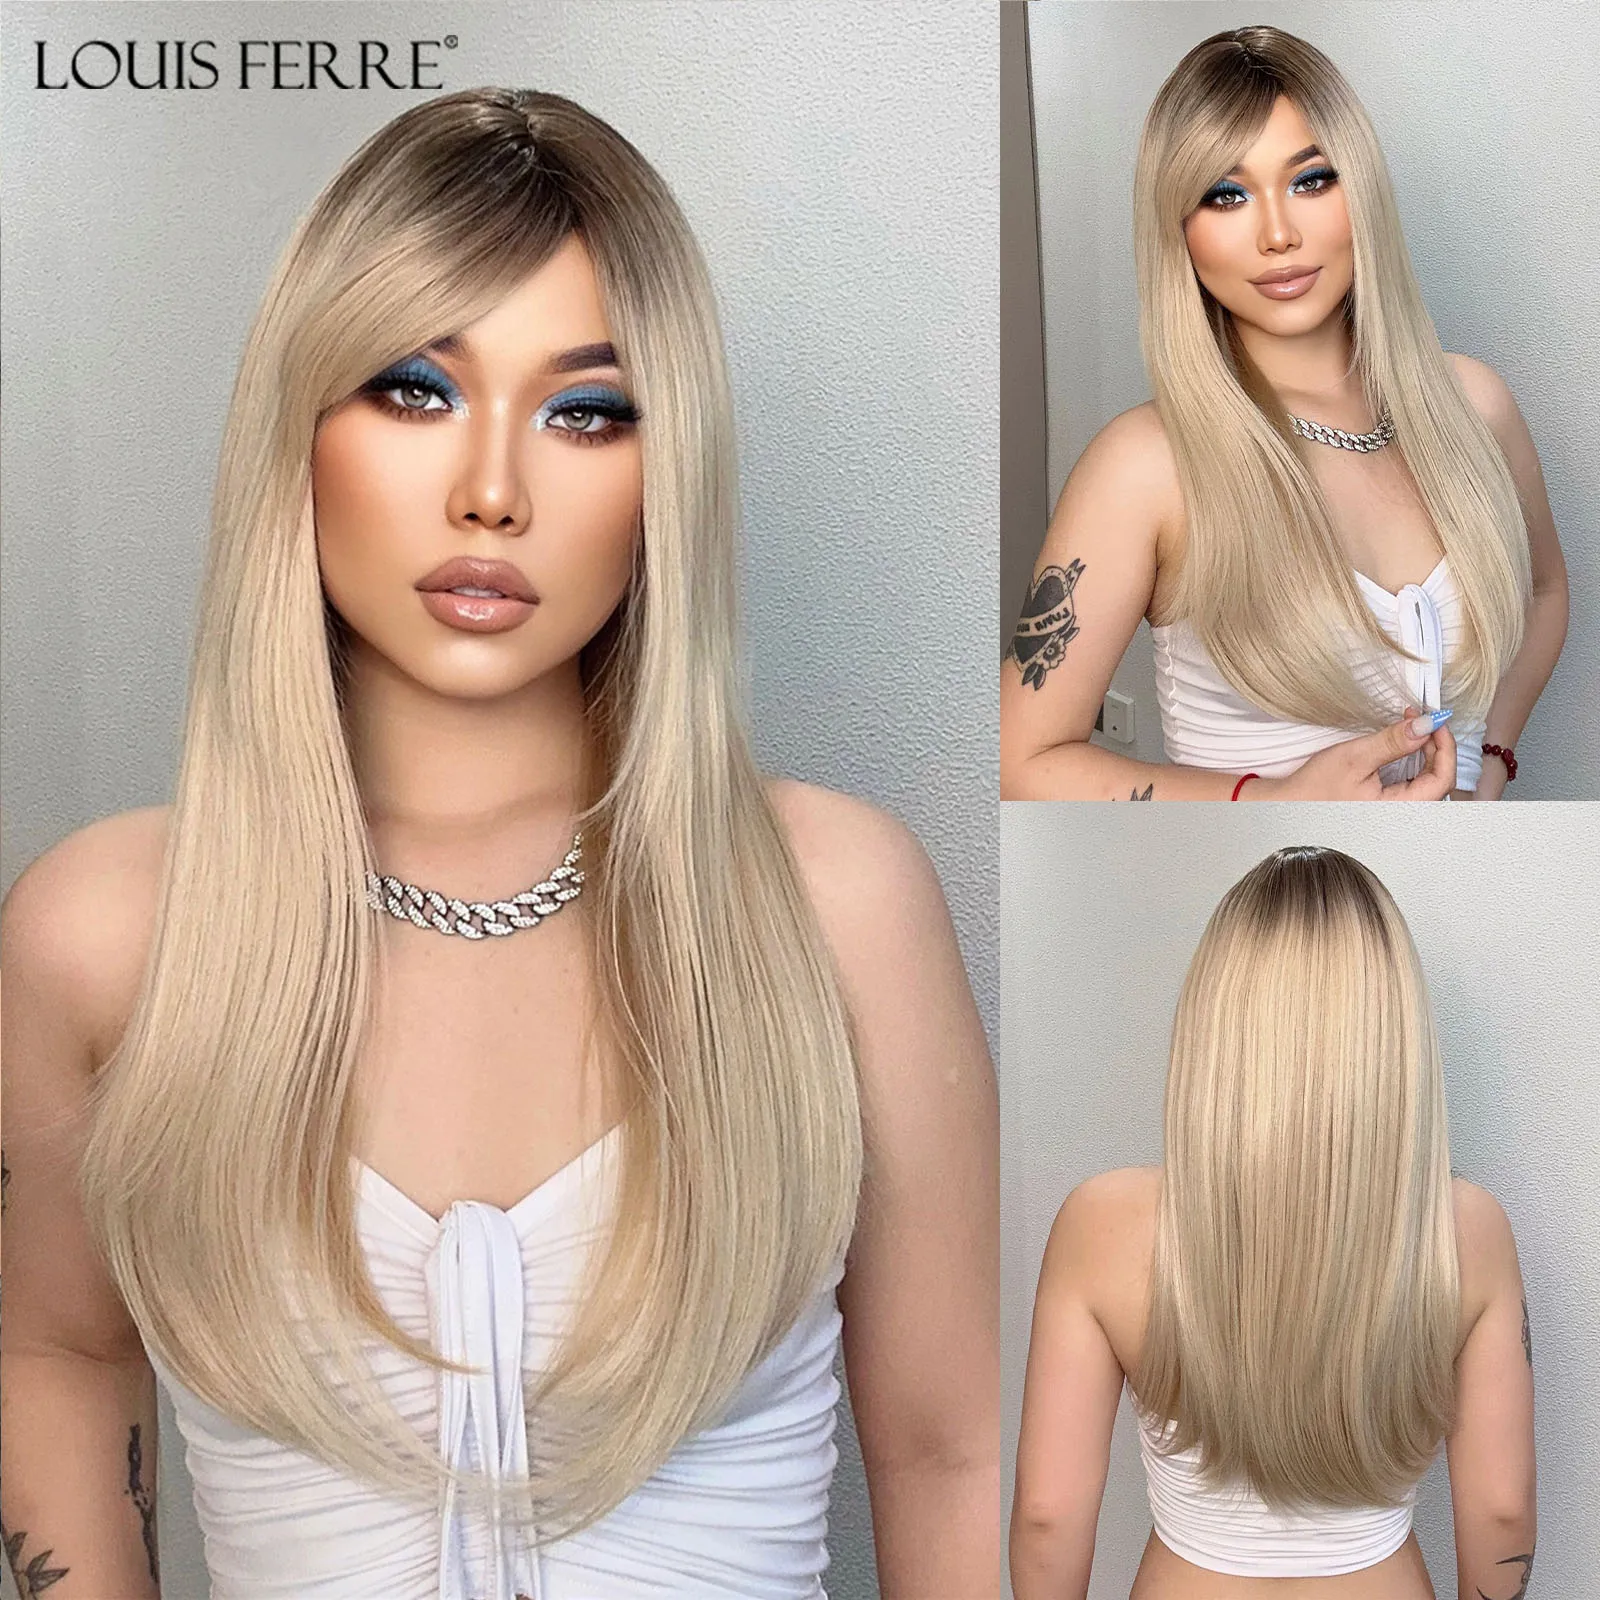 

LOUIS FERRE Long Silk Straight Synthetic Wigs with Bangs Ombre Light Blonde Dark Root Heat Resistant Wig For Women Daily Cosplay